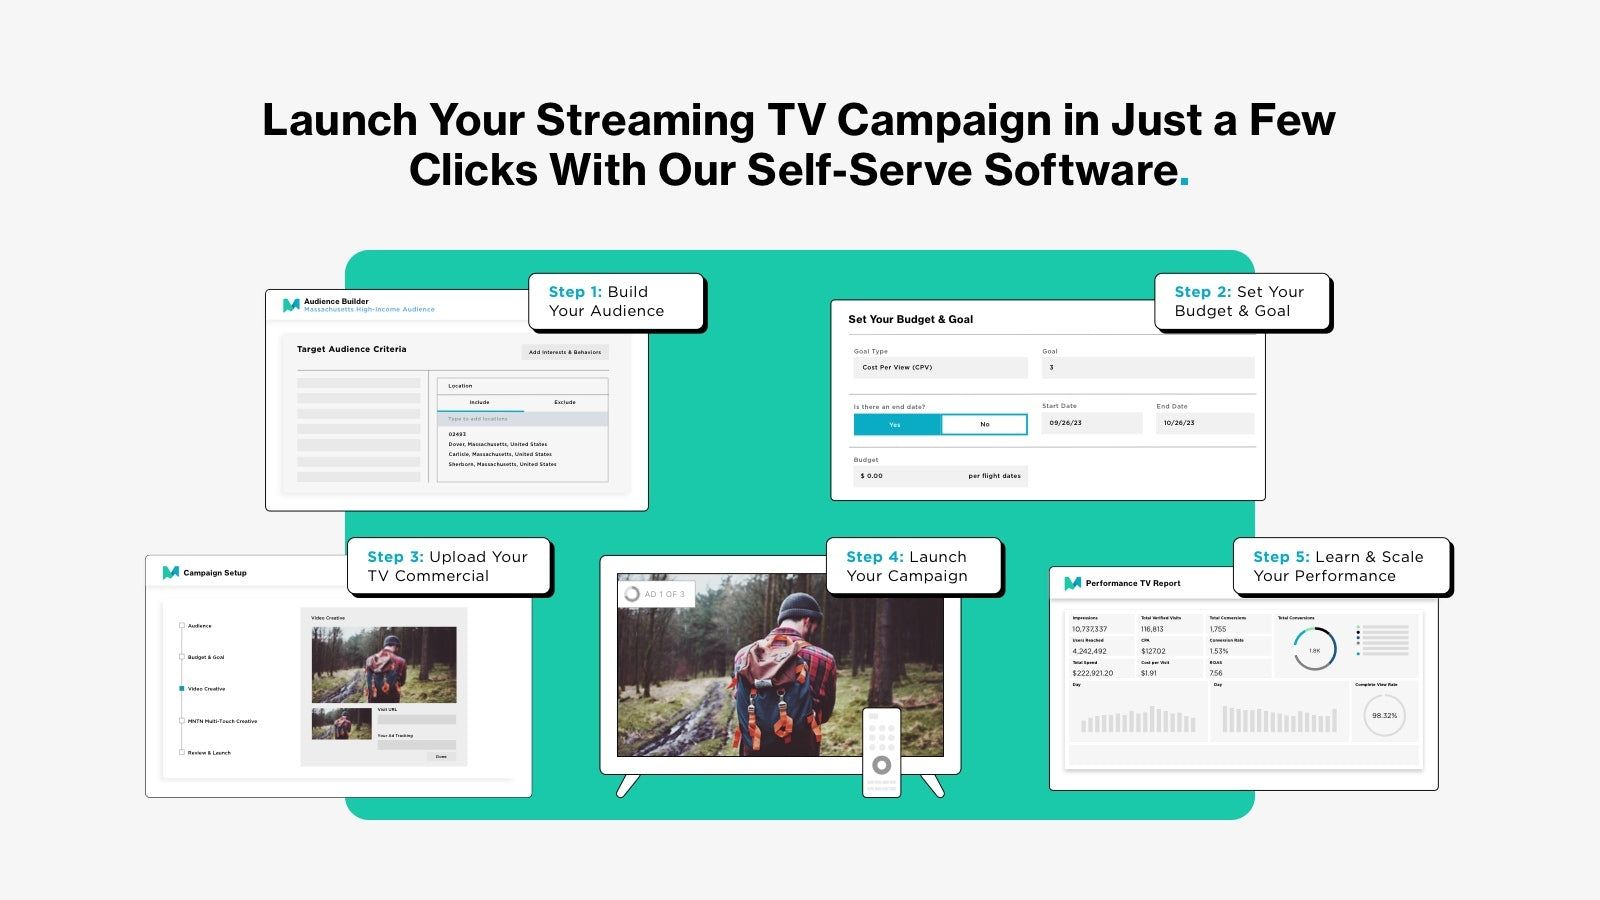 Launch your streaming TV campaign in just a few clicks.